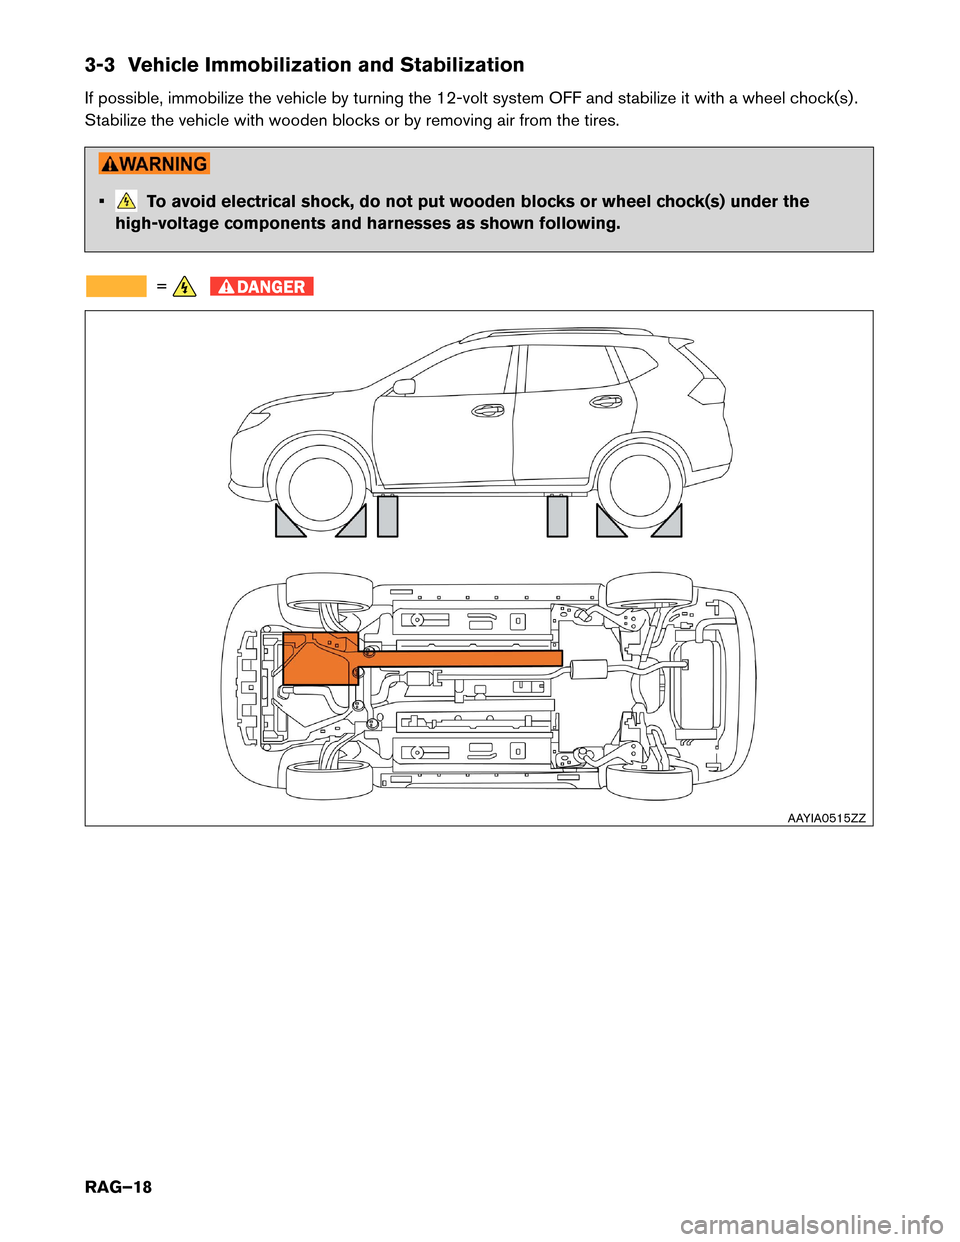 NISSAN ROGUE HYBRID 2017 2.G Roadside Assistance Guide 3-3 Vehicle Immobilization and Stabilization
If
possible, immobilize the vehicle by turning the 12-volt system OFF and stabilize it with a wheel chock(s) .
Stabilize the vehicle with wooden blocks or 